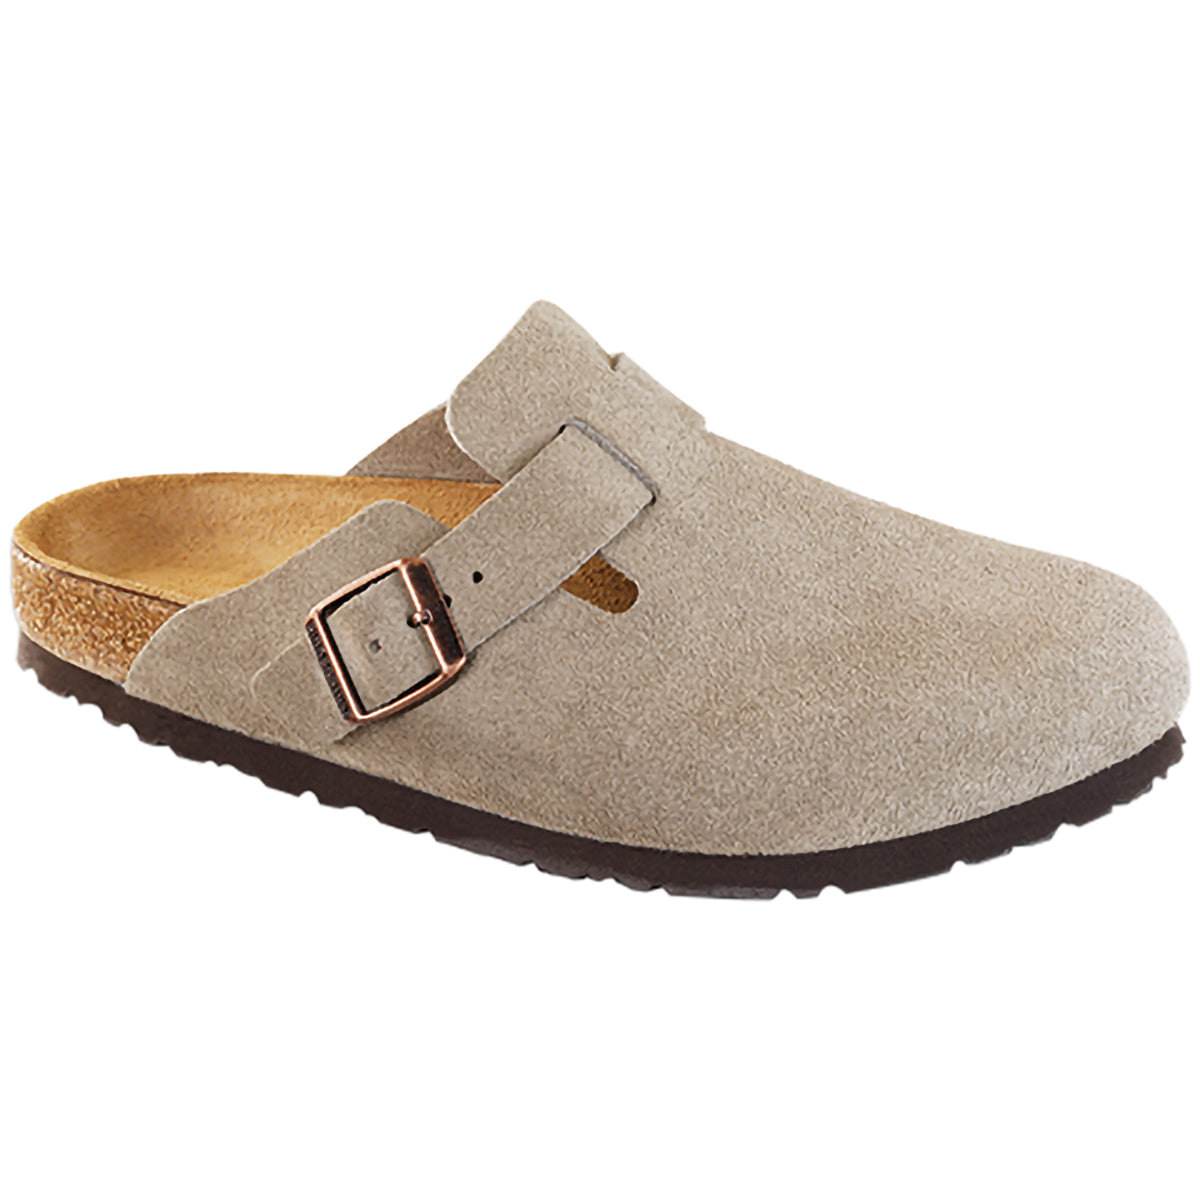 Birkenstock Boston Soft Footbed - Suede Leather Taupe